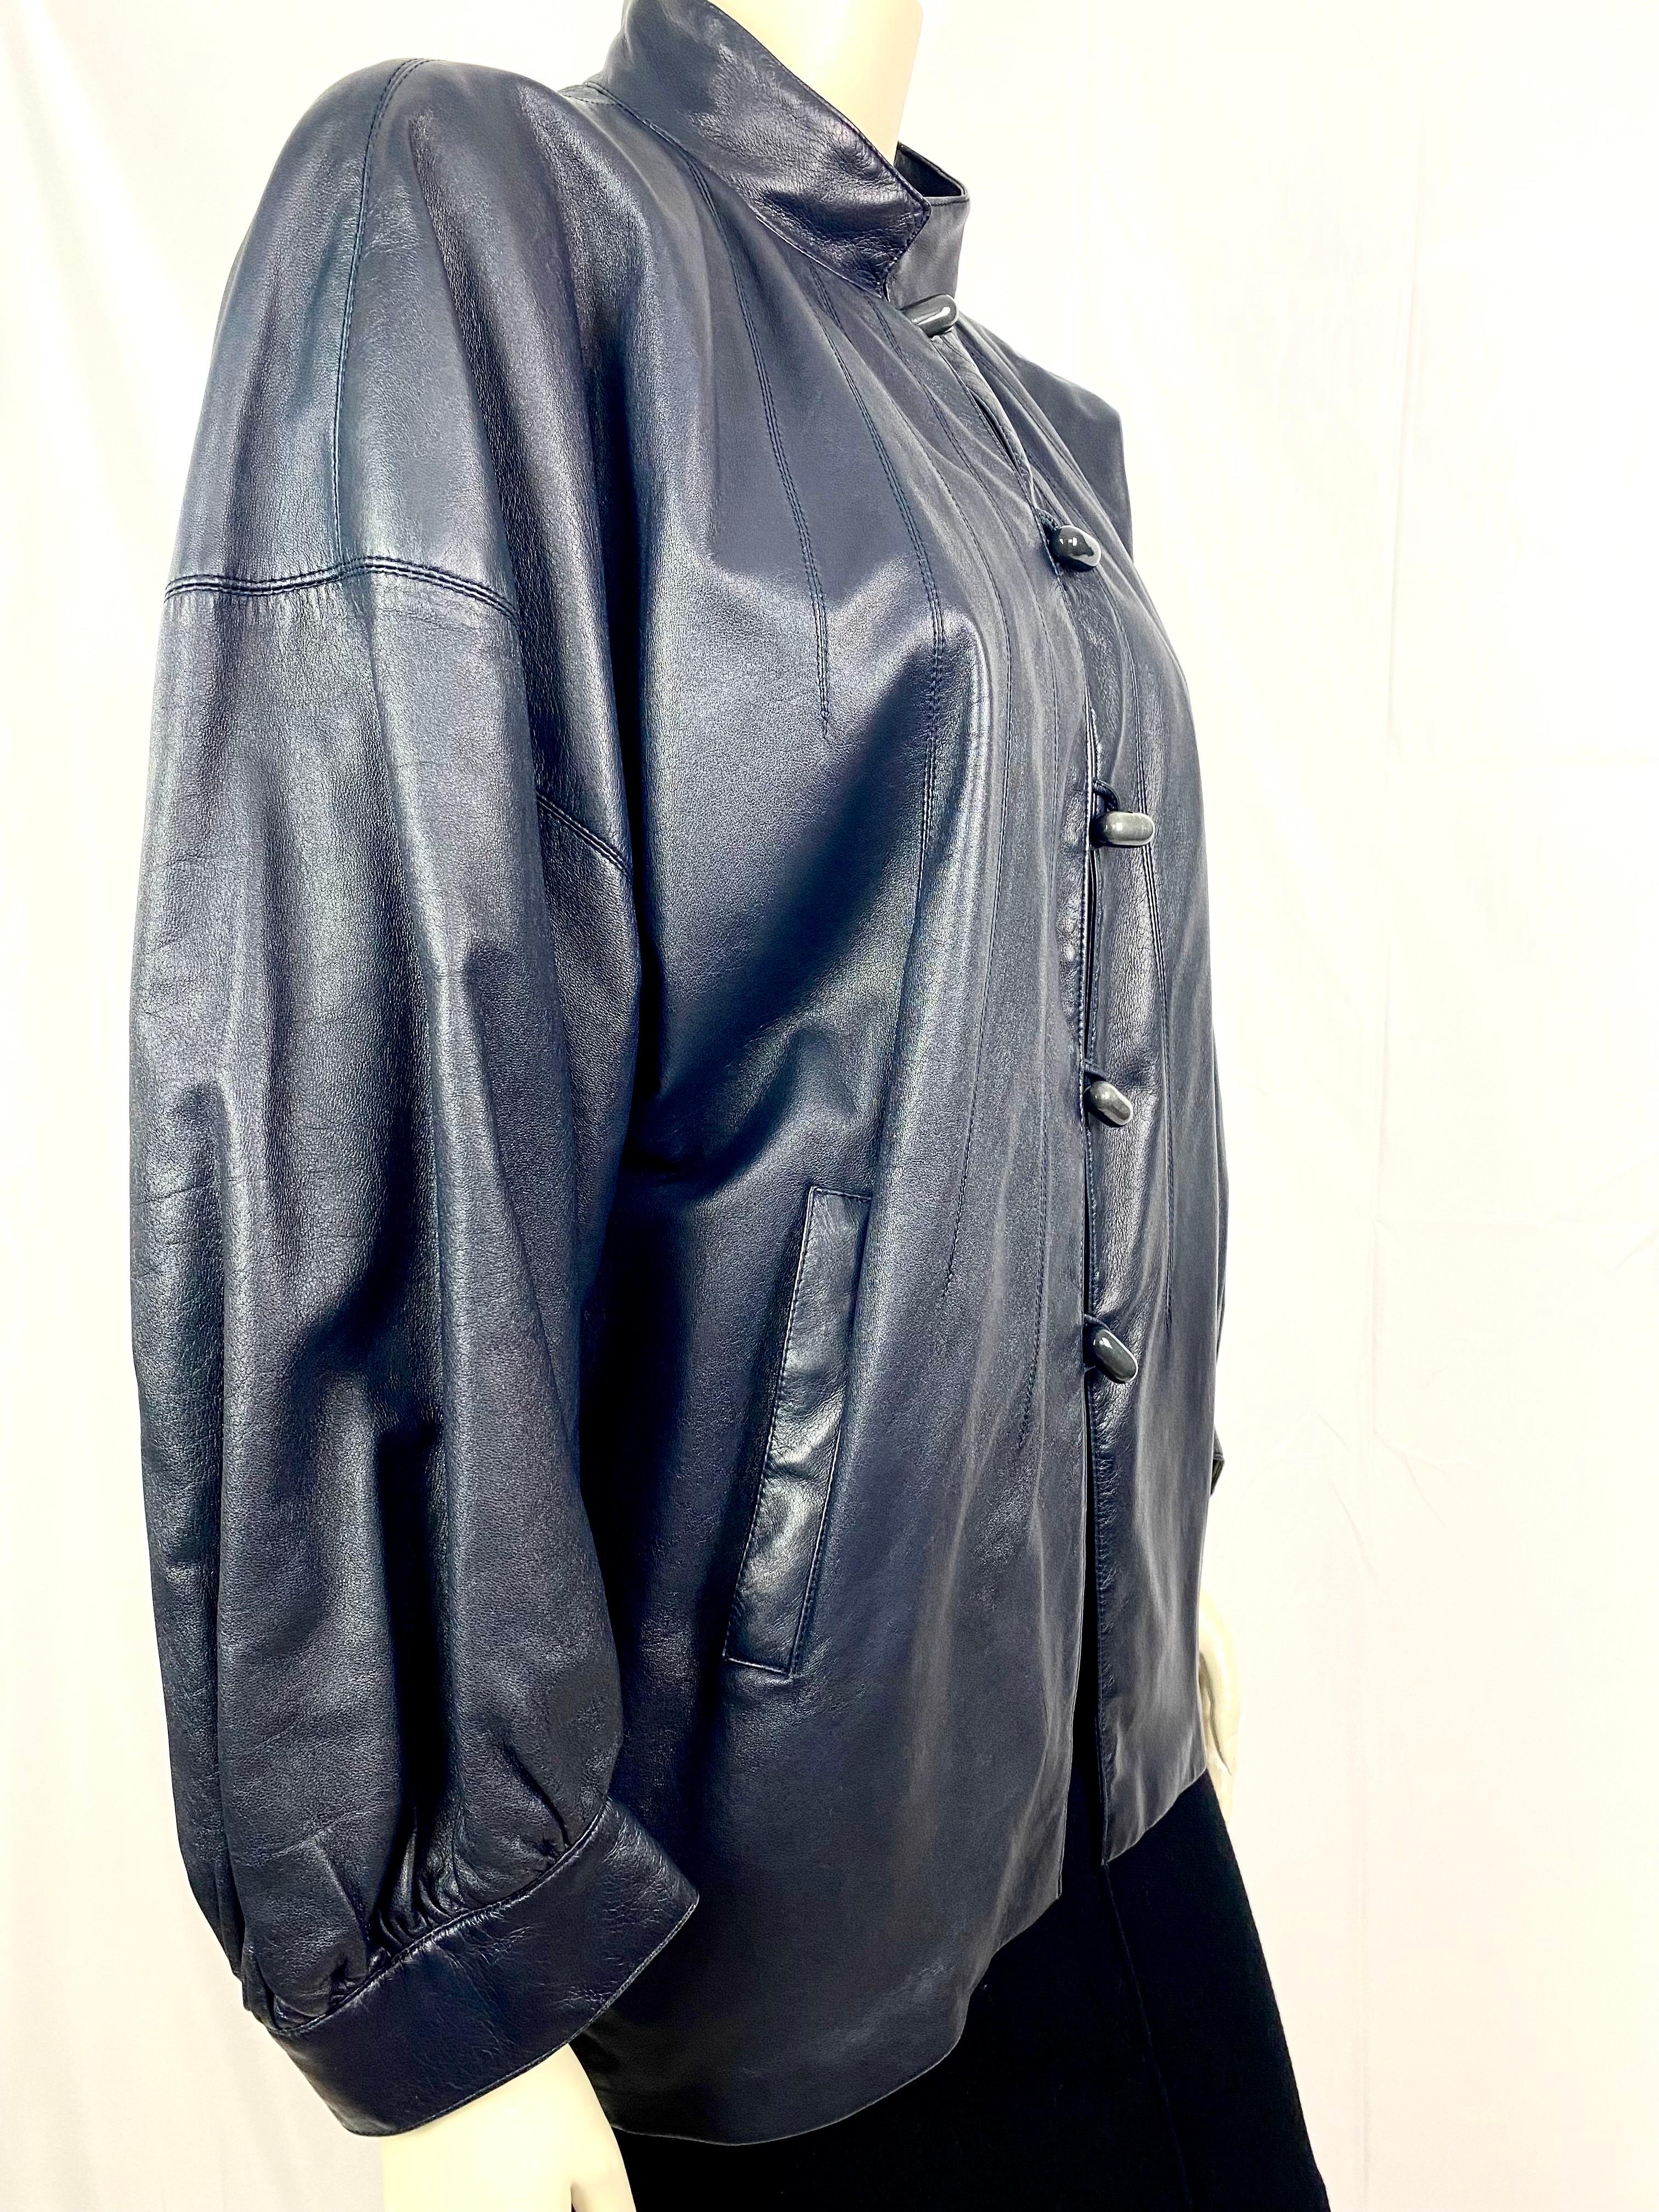 Vintage lamb leather jacket by Yves saint laurent rive gauche  from the 1980s 4